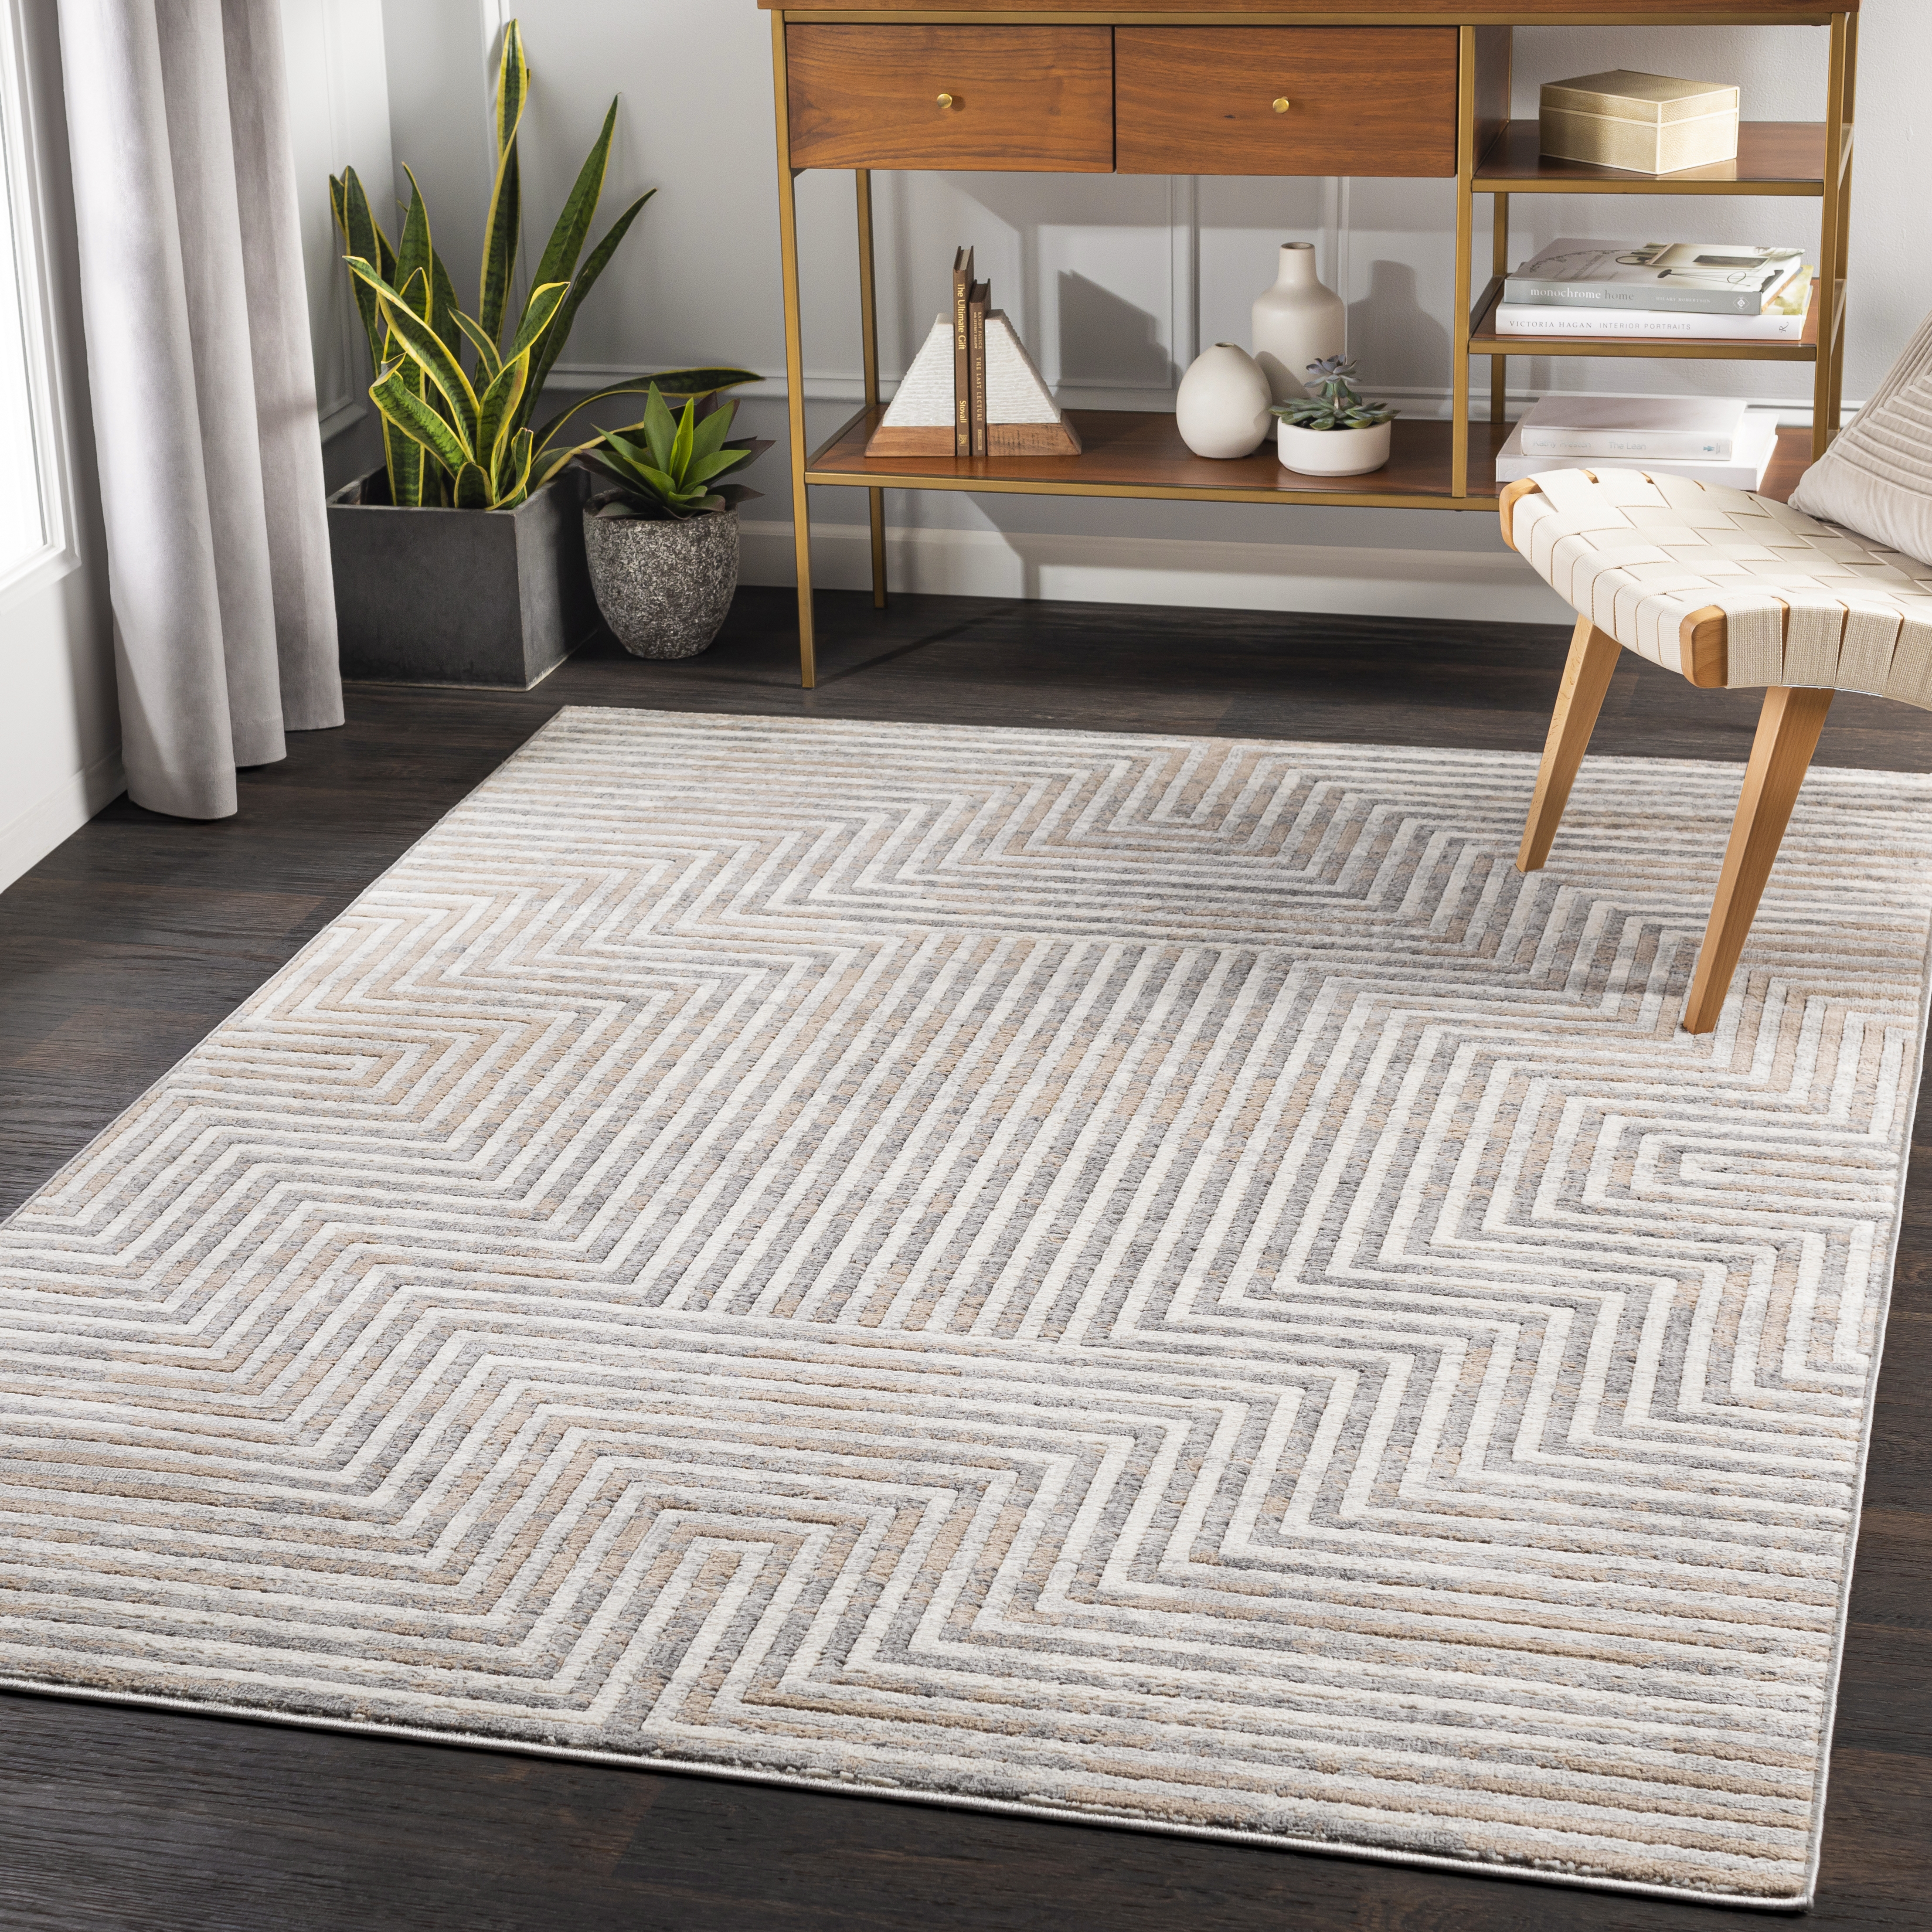 Remy Rug, 5'3" x 7'3" - Image 1